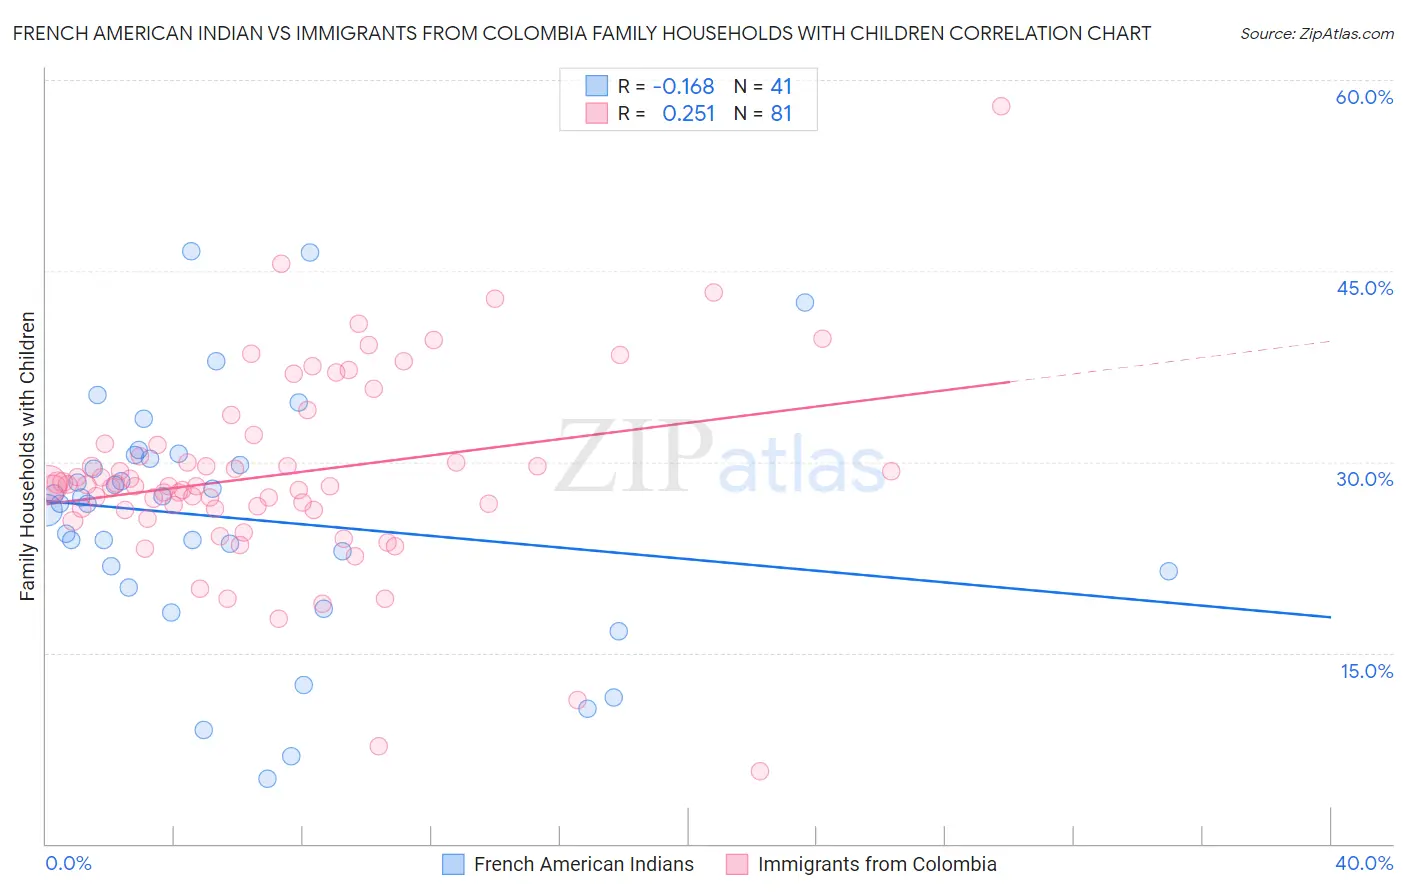 French American Indian vs Immigrants from Colombia Family Households with Children